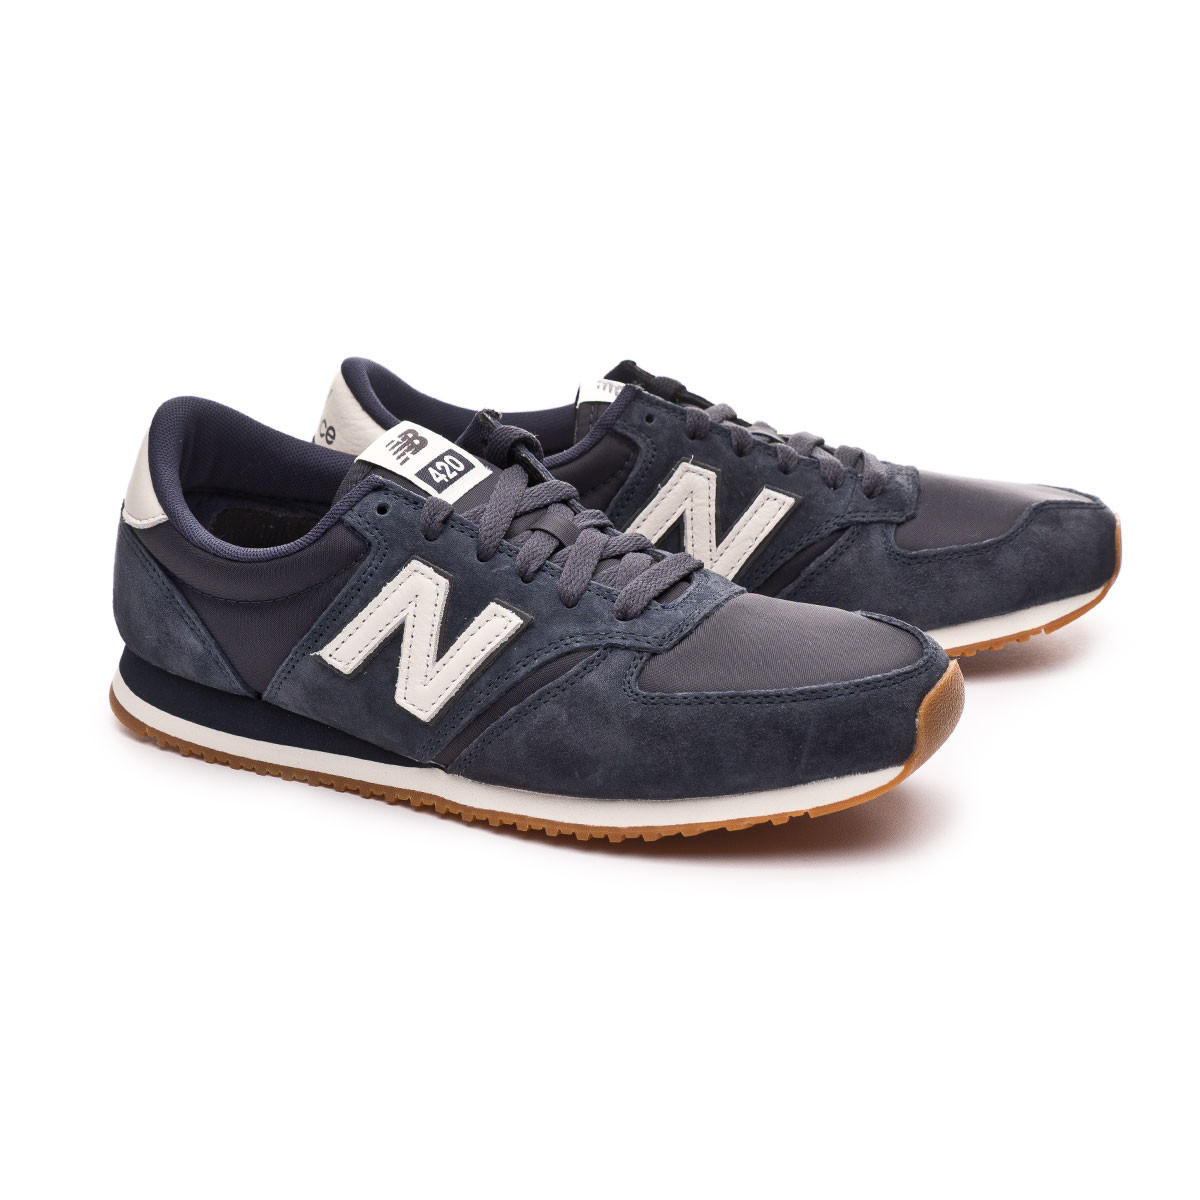 420 new balance Shop Clothing & Shoes Online